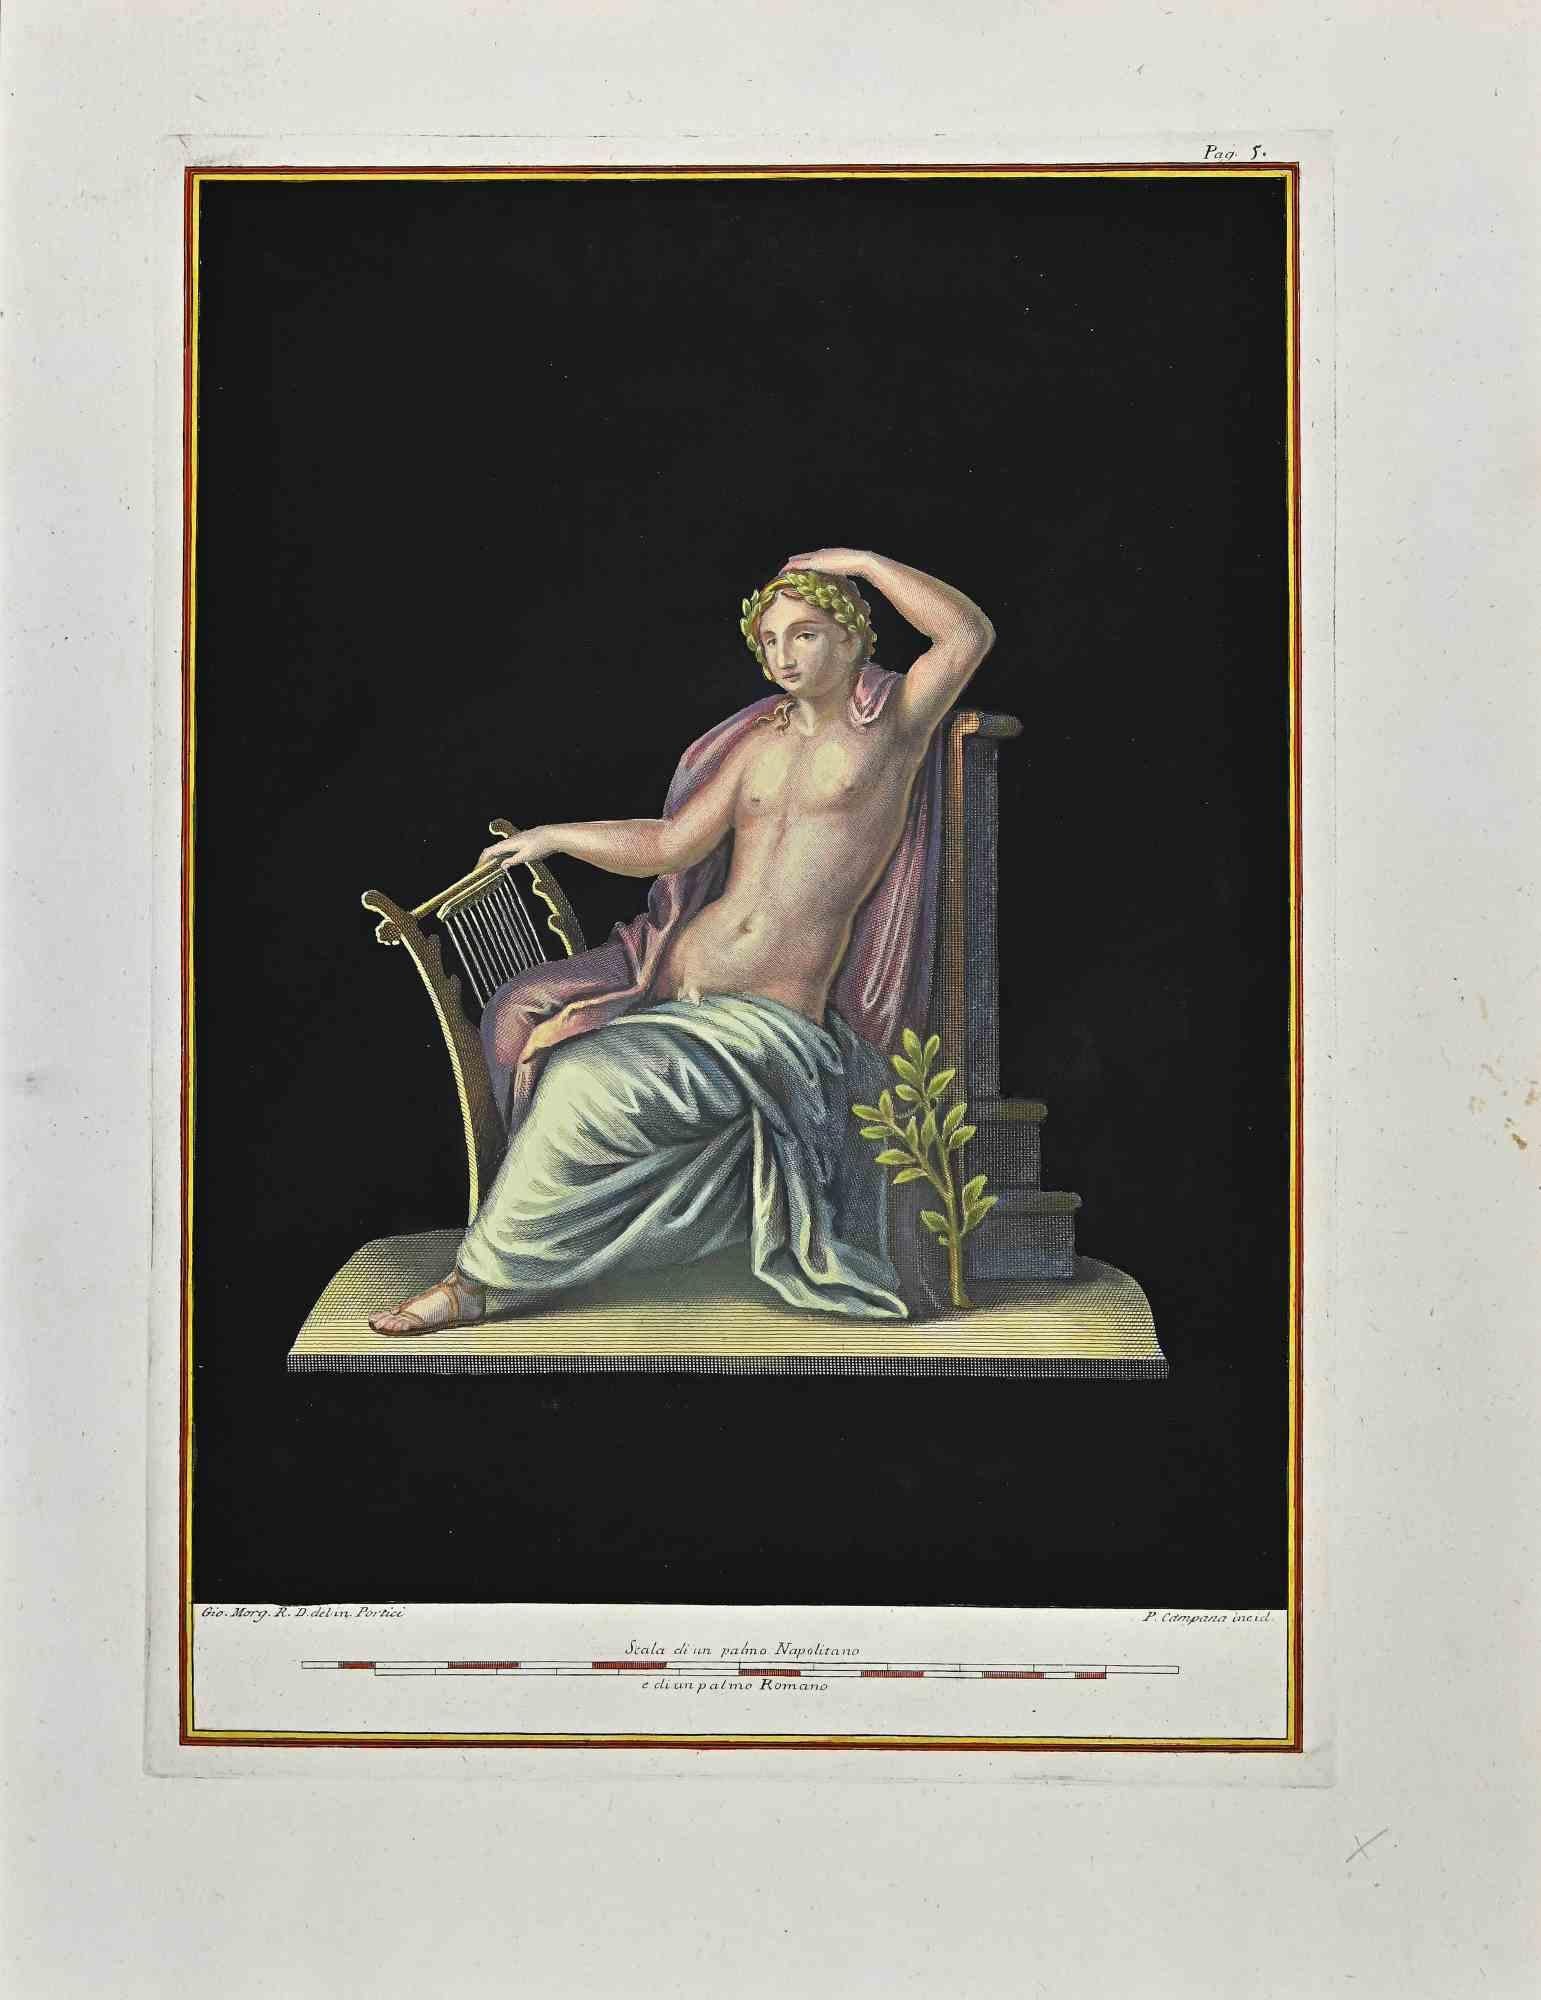 Roman Fresco  from "Antiquities of Herculaneum" is an etching on paper realized by Ferdinando Campana in 1772s.

Signed on the plate.

Good conditions.

The etching belongs to the print suite “Antiquities of Herculaneum Exposed” (original title: “Le